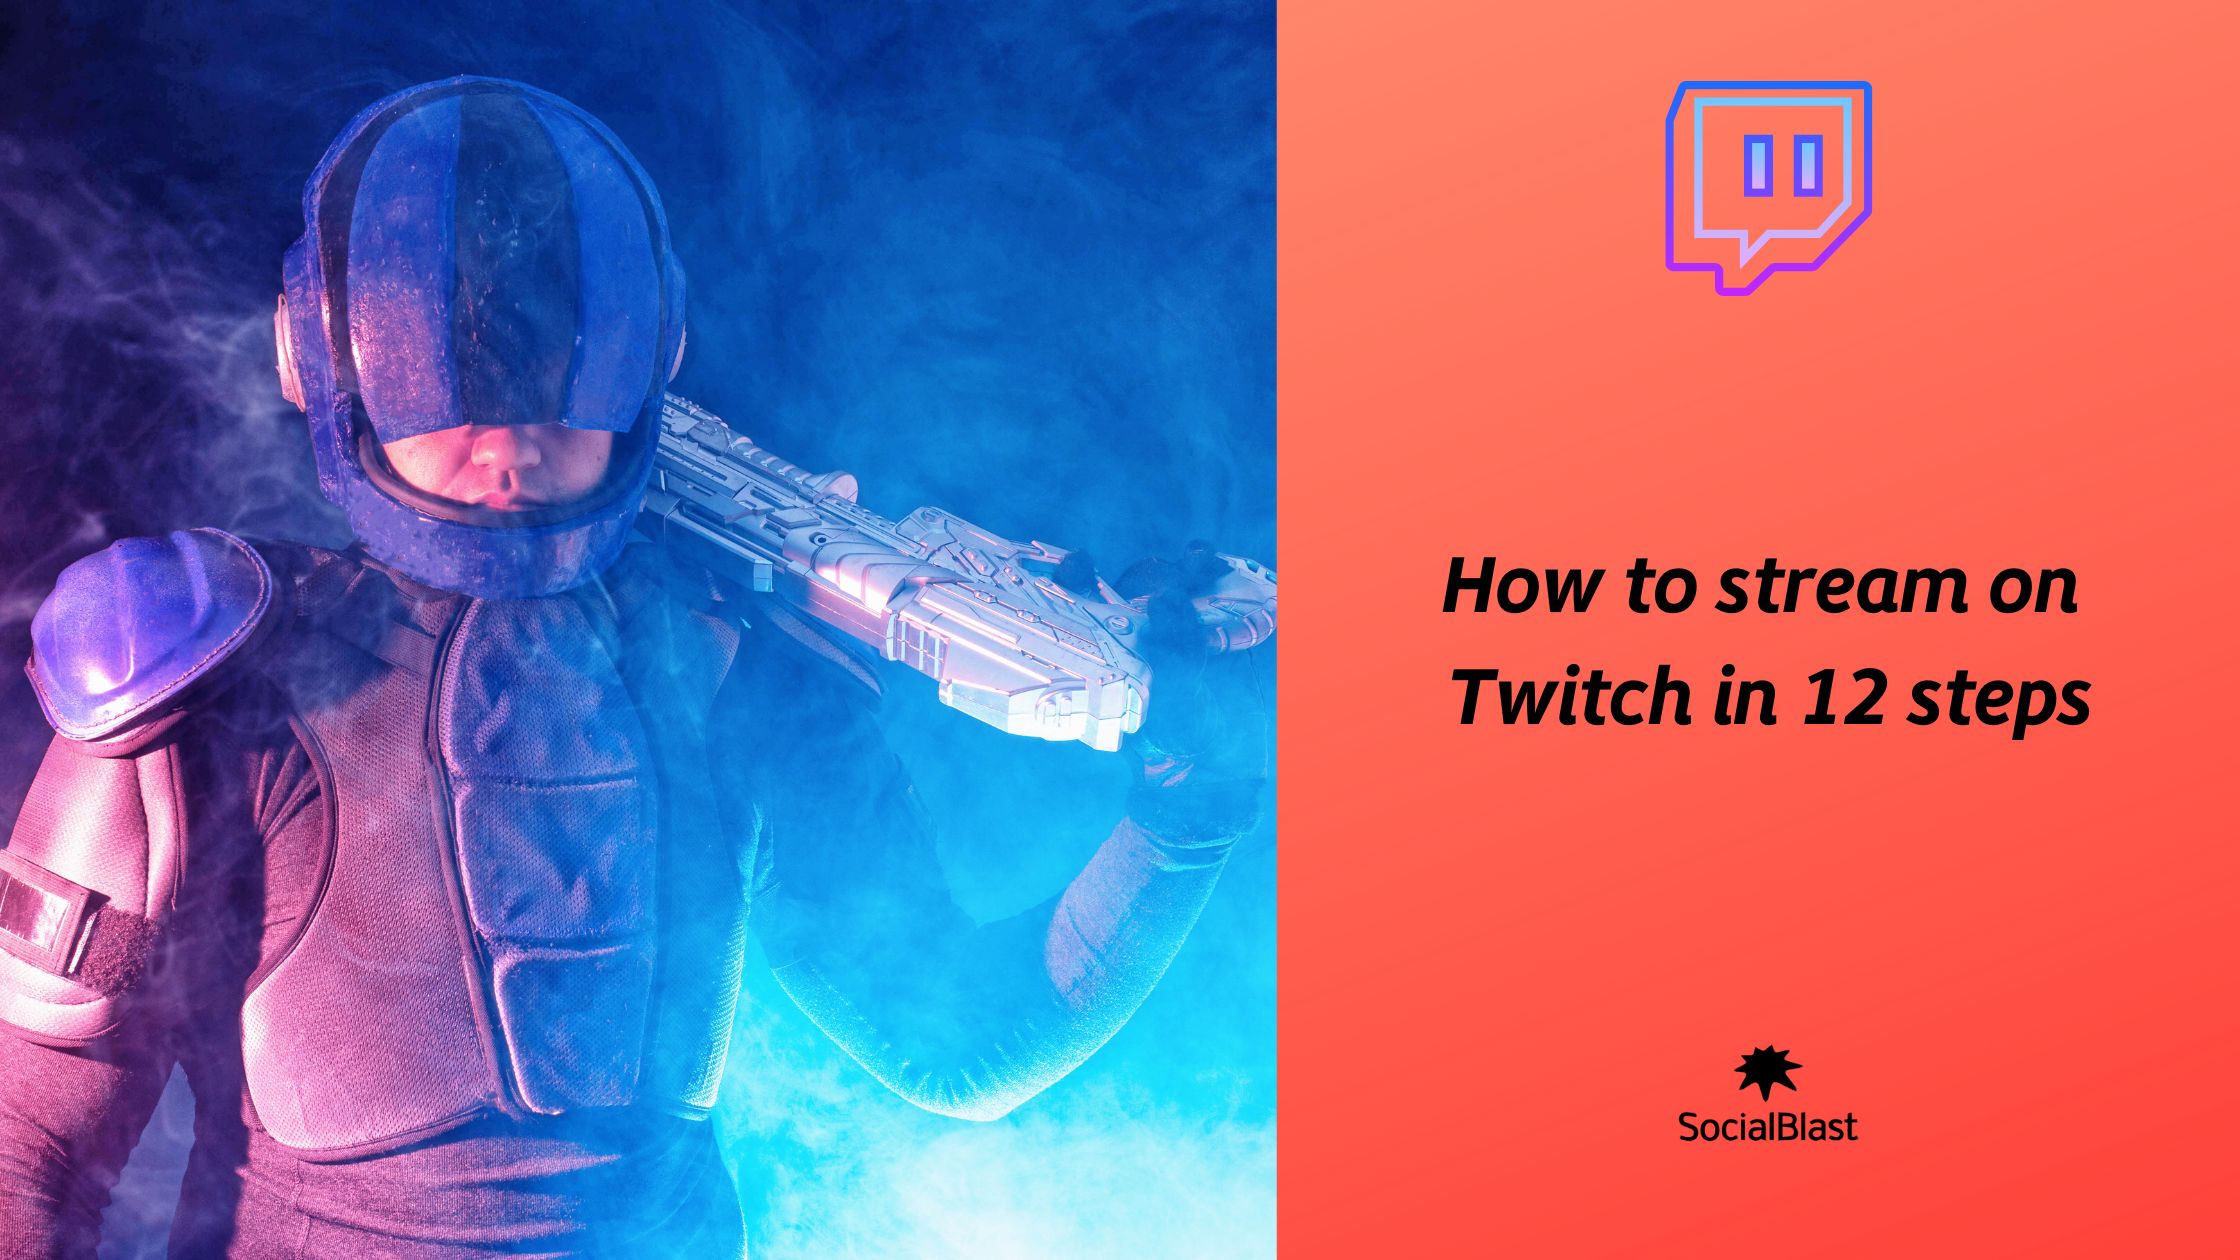 How to stream on Twitch in 12 steps